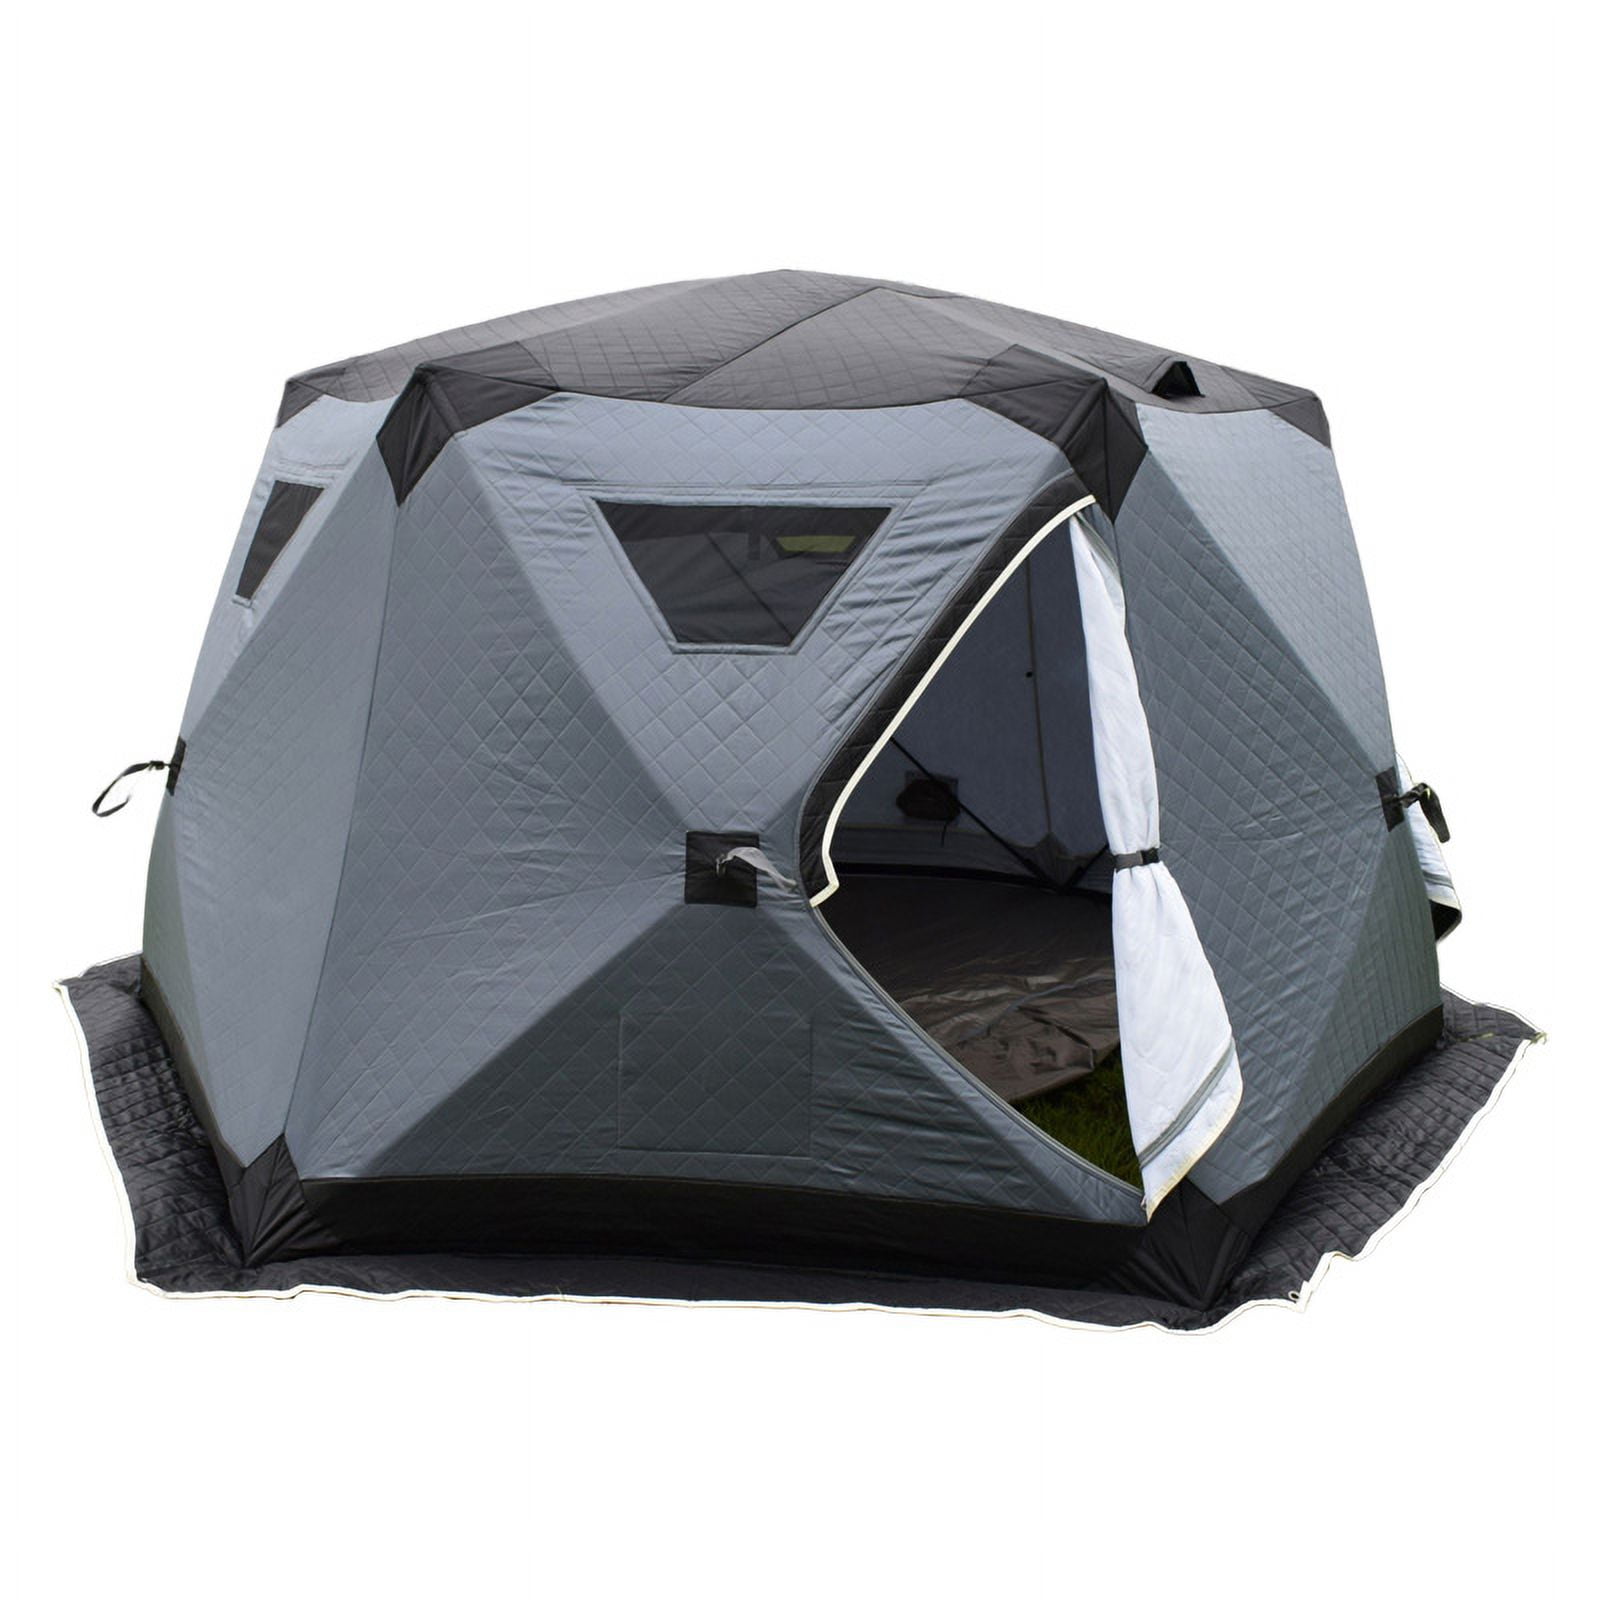 EZ Lite Fully Insulated Ice Fishing Tent, Sleeps 4-5 persons 10.8ft x